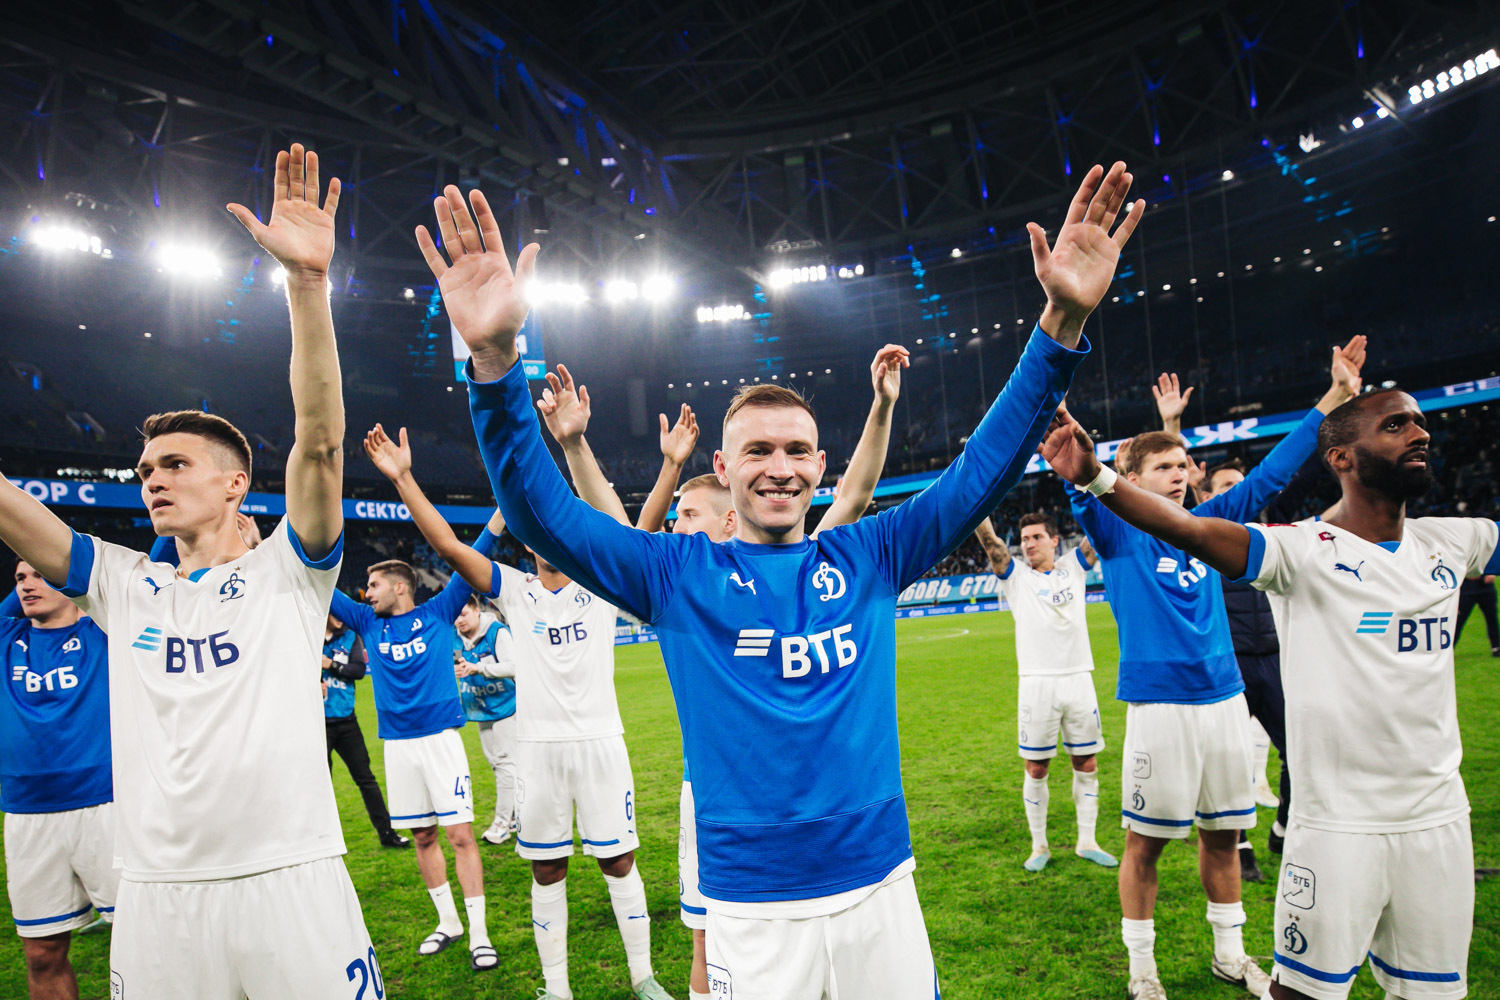 Photo gallery from away Cup game against Zenit